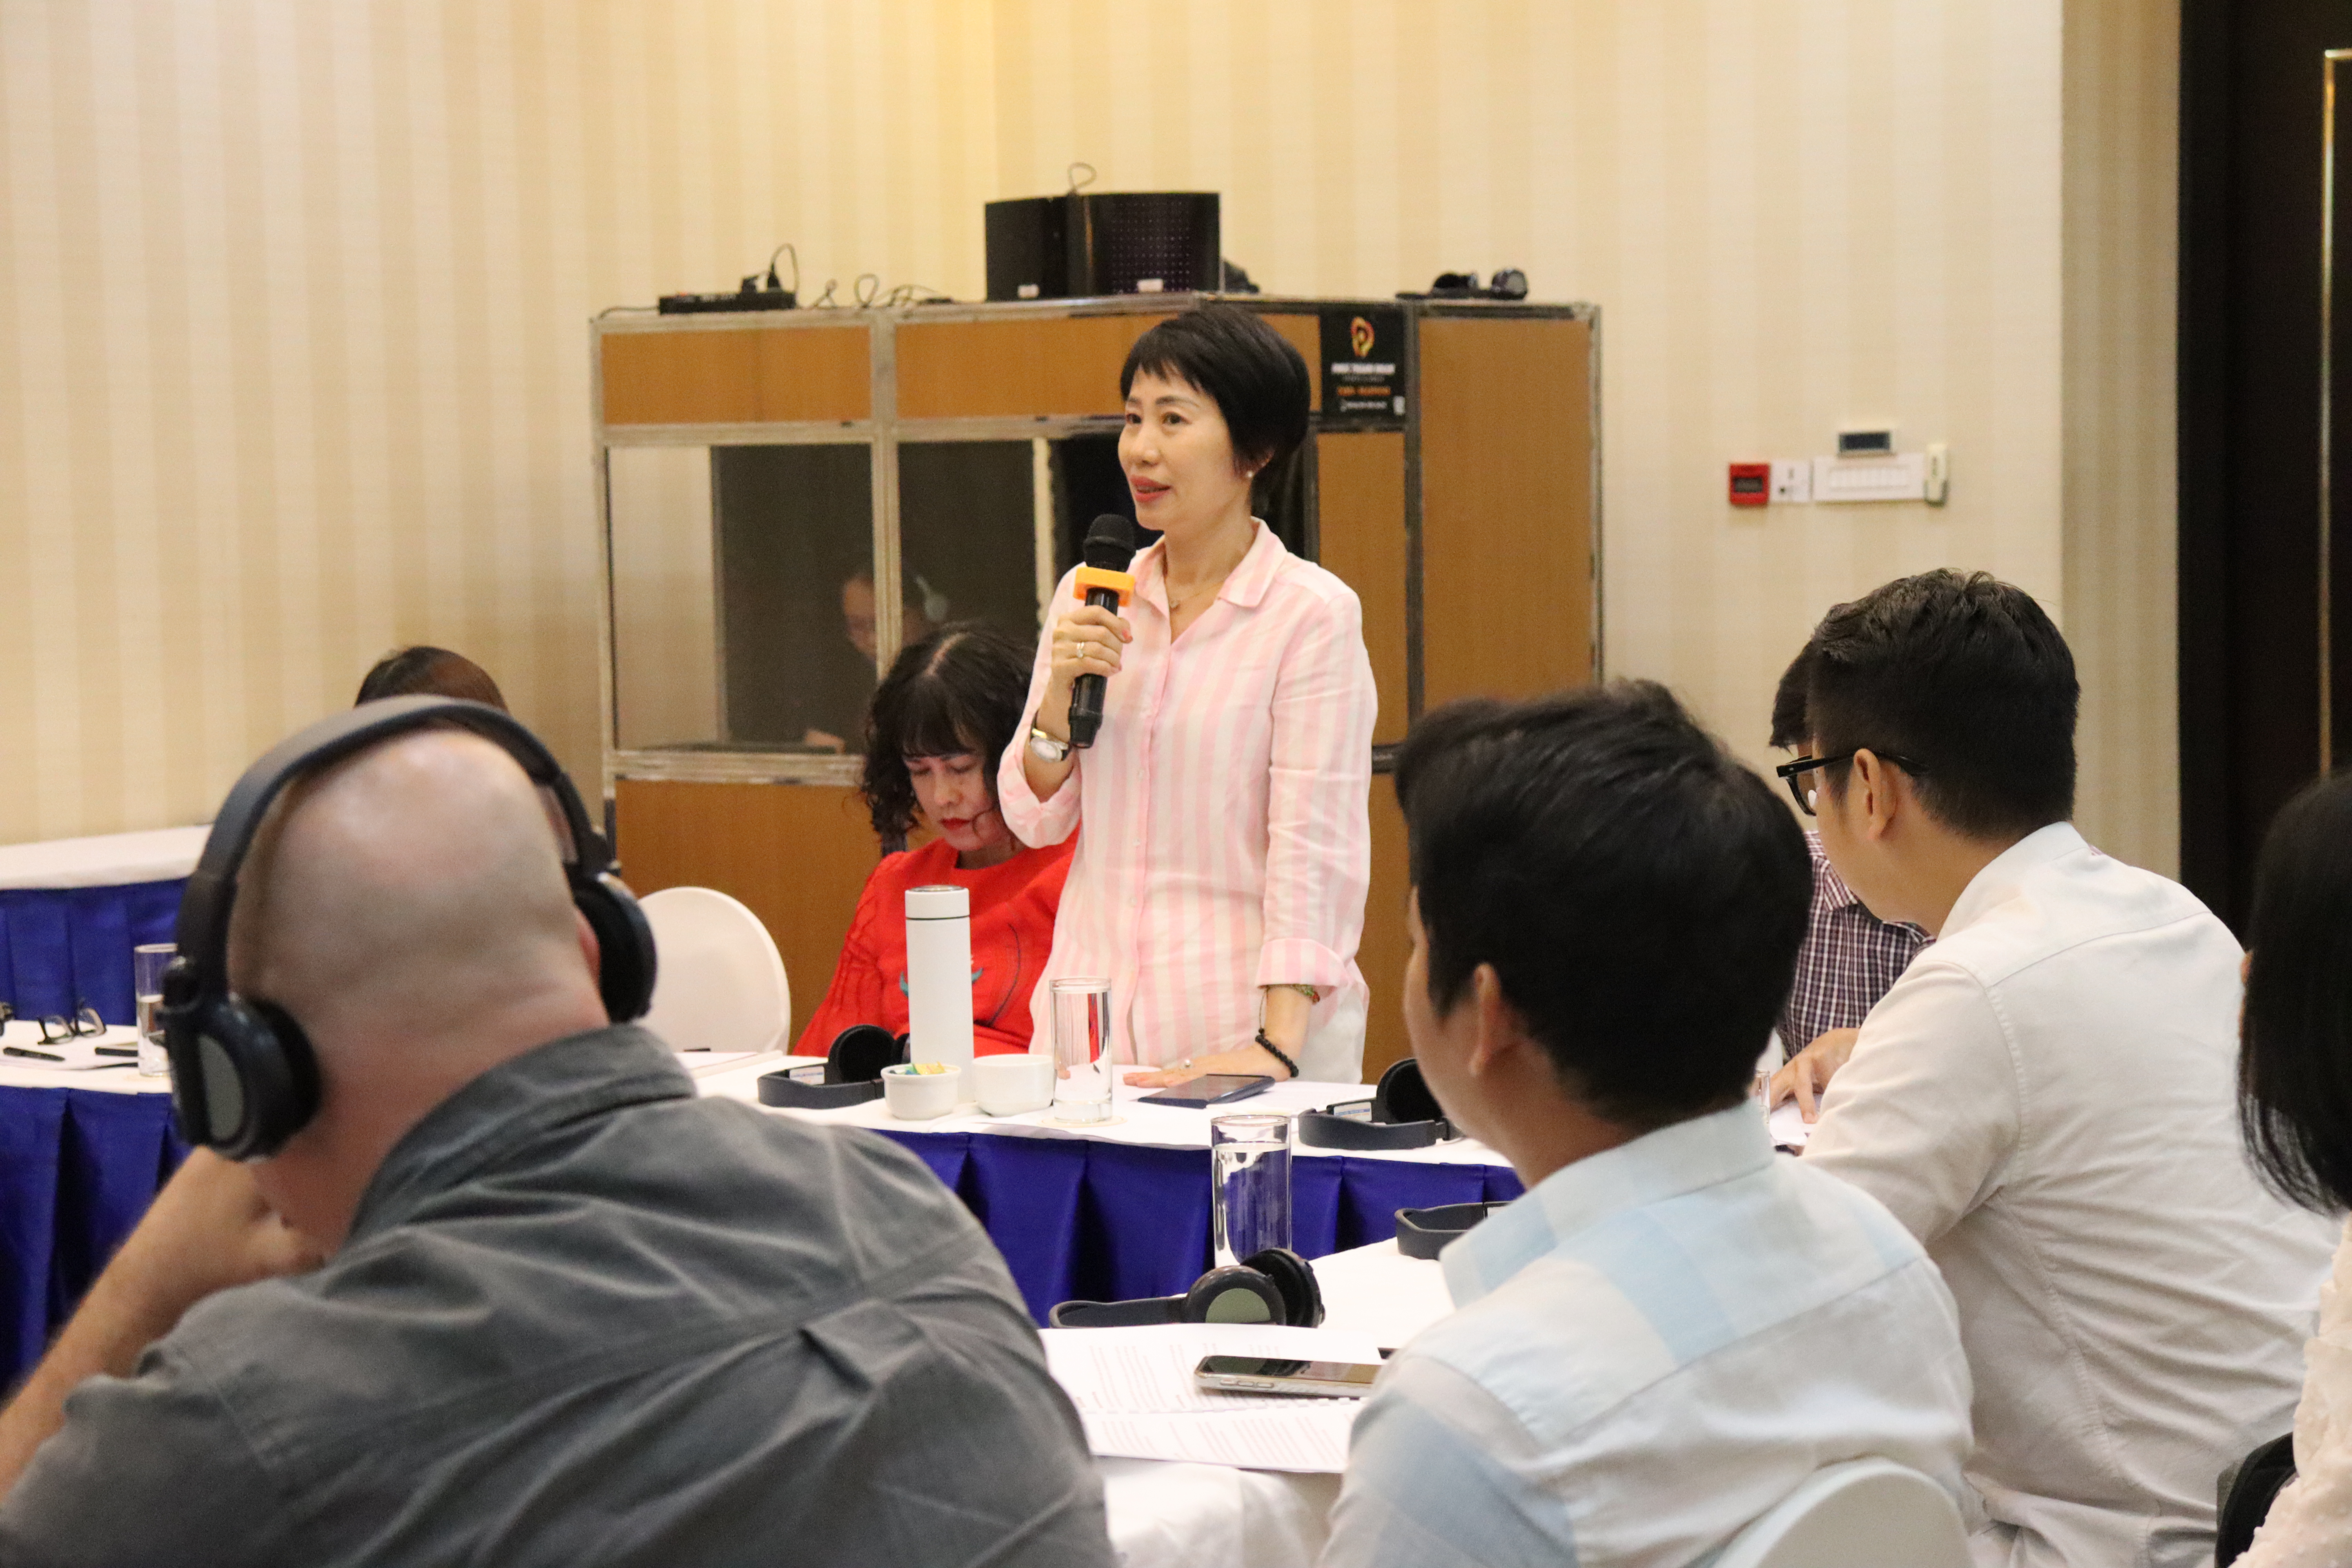 Ms Tran Thi Ha Binh, Senior HR Manager of textiles company Bowker Viet Nam Garment, provided feedback during the validation workshop on 17 March 2023 @IOM Viet Nam